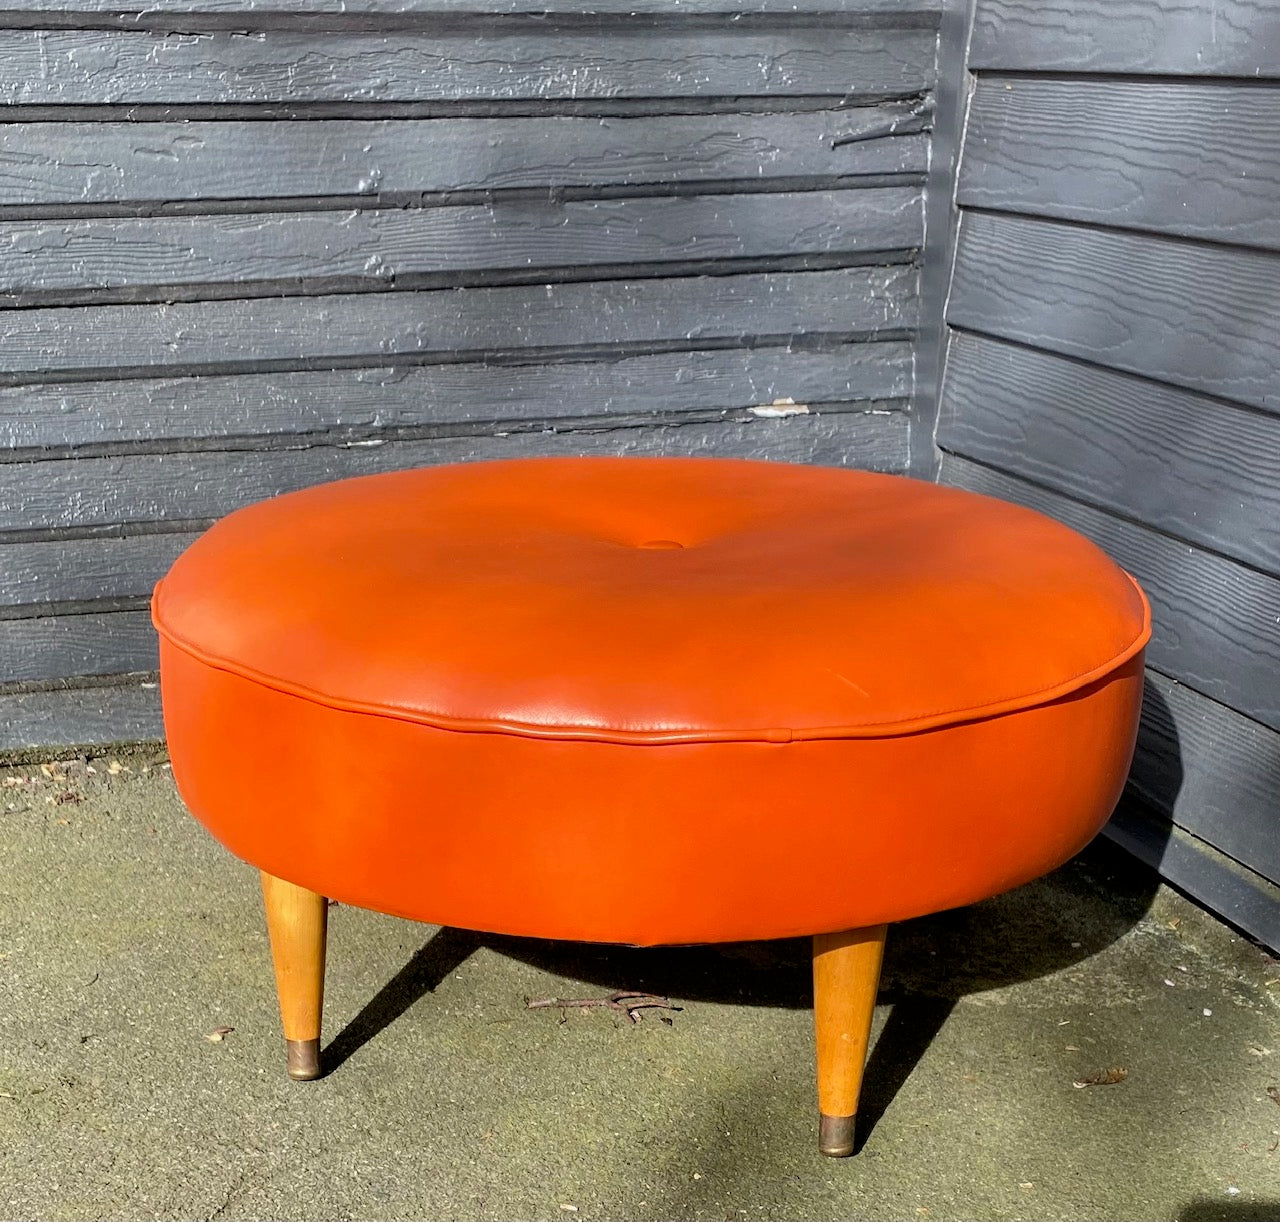 Classic round four leg round foot stool in orange. Tapered legs with brass caps. Centre button detail on cushion- Cook Street Vintage.